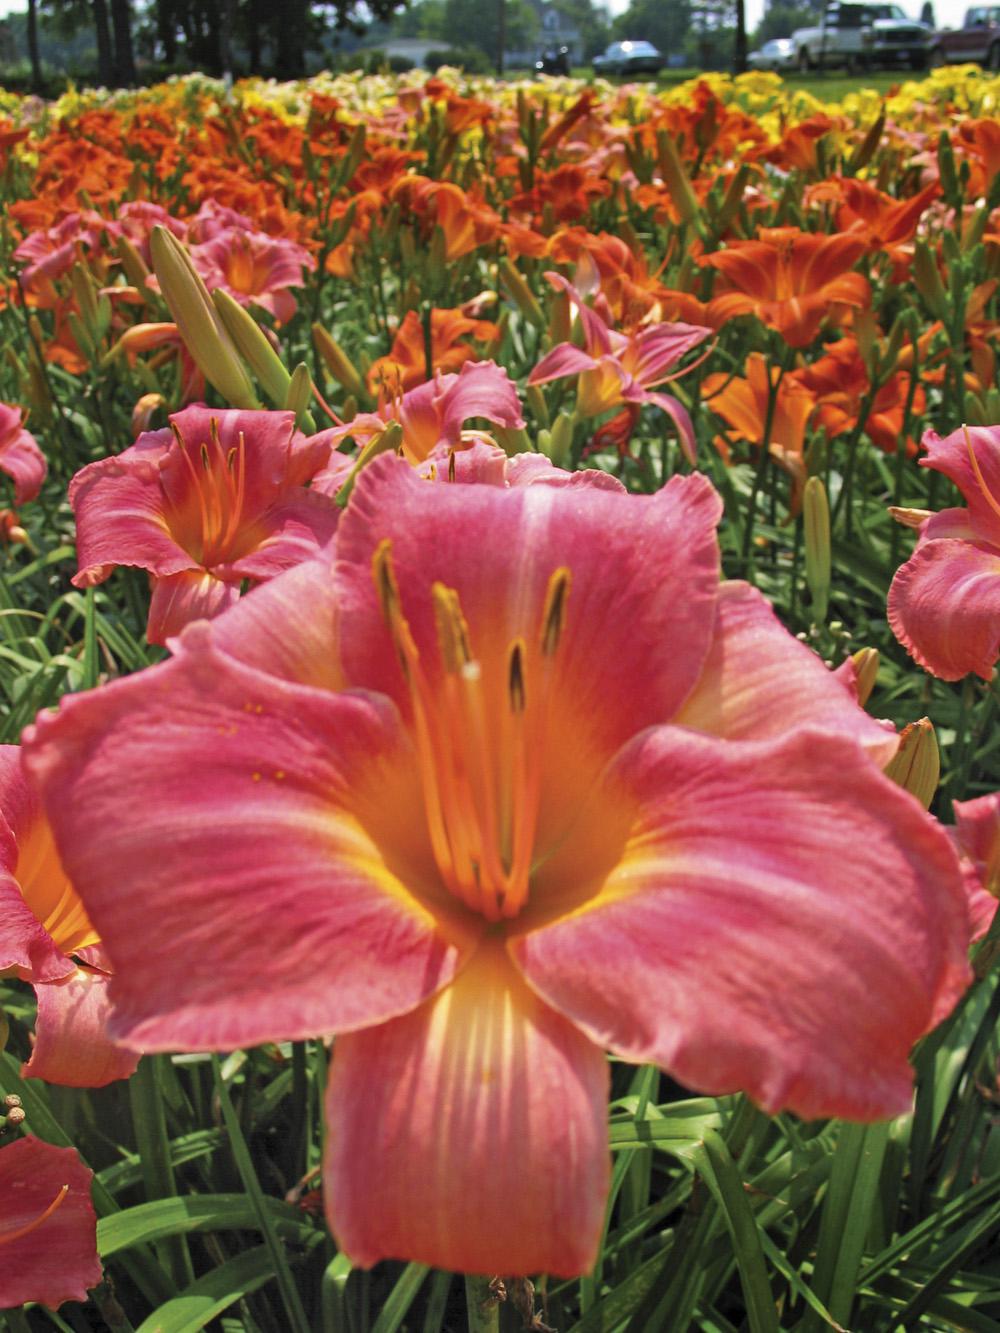 This All-American daylily winner is a large, showy salmon-pink variety with a rose halo.  It is a robust performer that produces loads of buds, blooming an average of 90 days per year.  It is easy to grow and does beautifully as a border, ground cover or container-grown specimen.